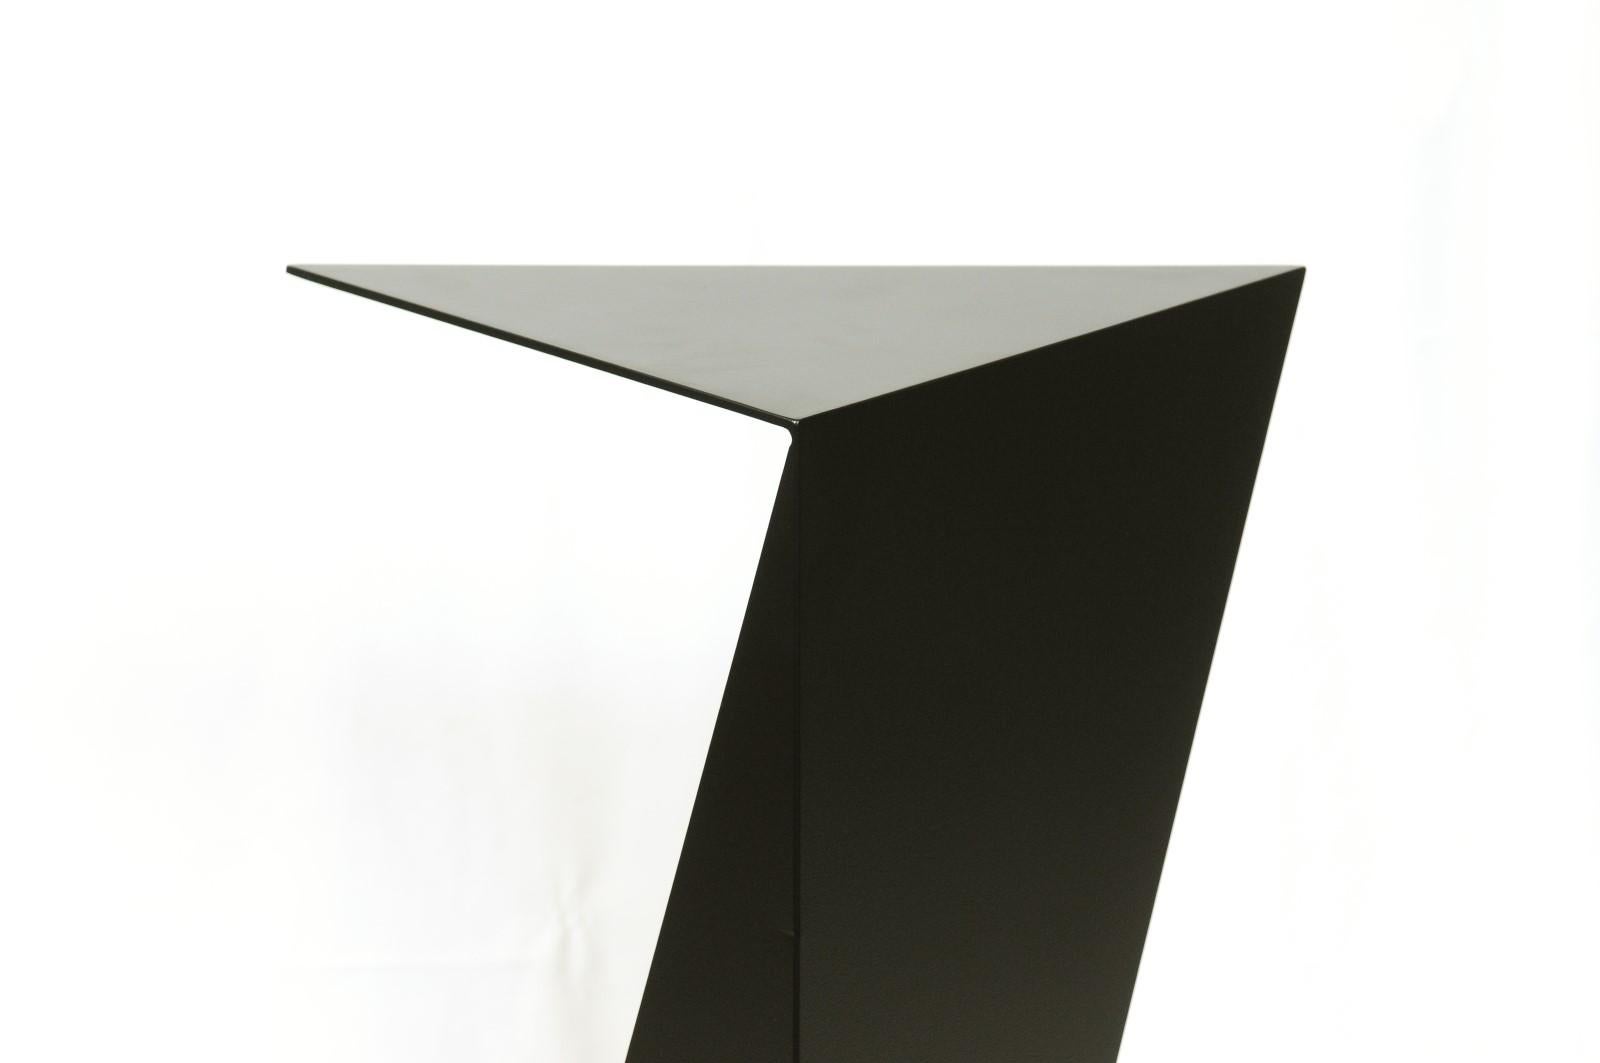 Origami Style Steel Pedestal Stand, Black Finish 8